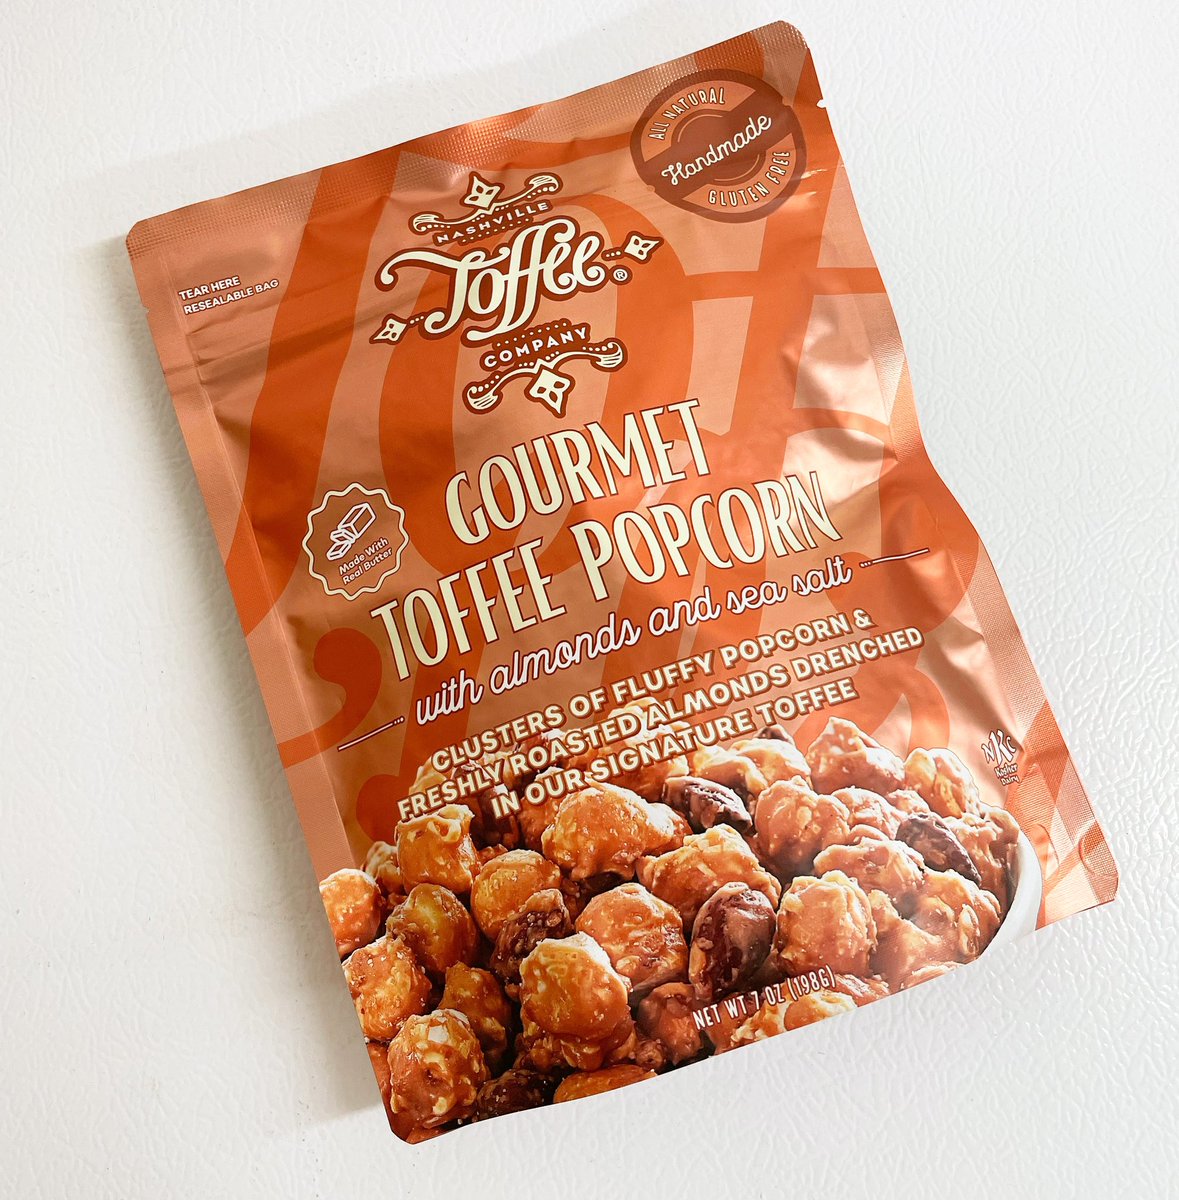 Lots of toffee popcorn delivered to @WholeFoods in Green Hills & Downtown this week!